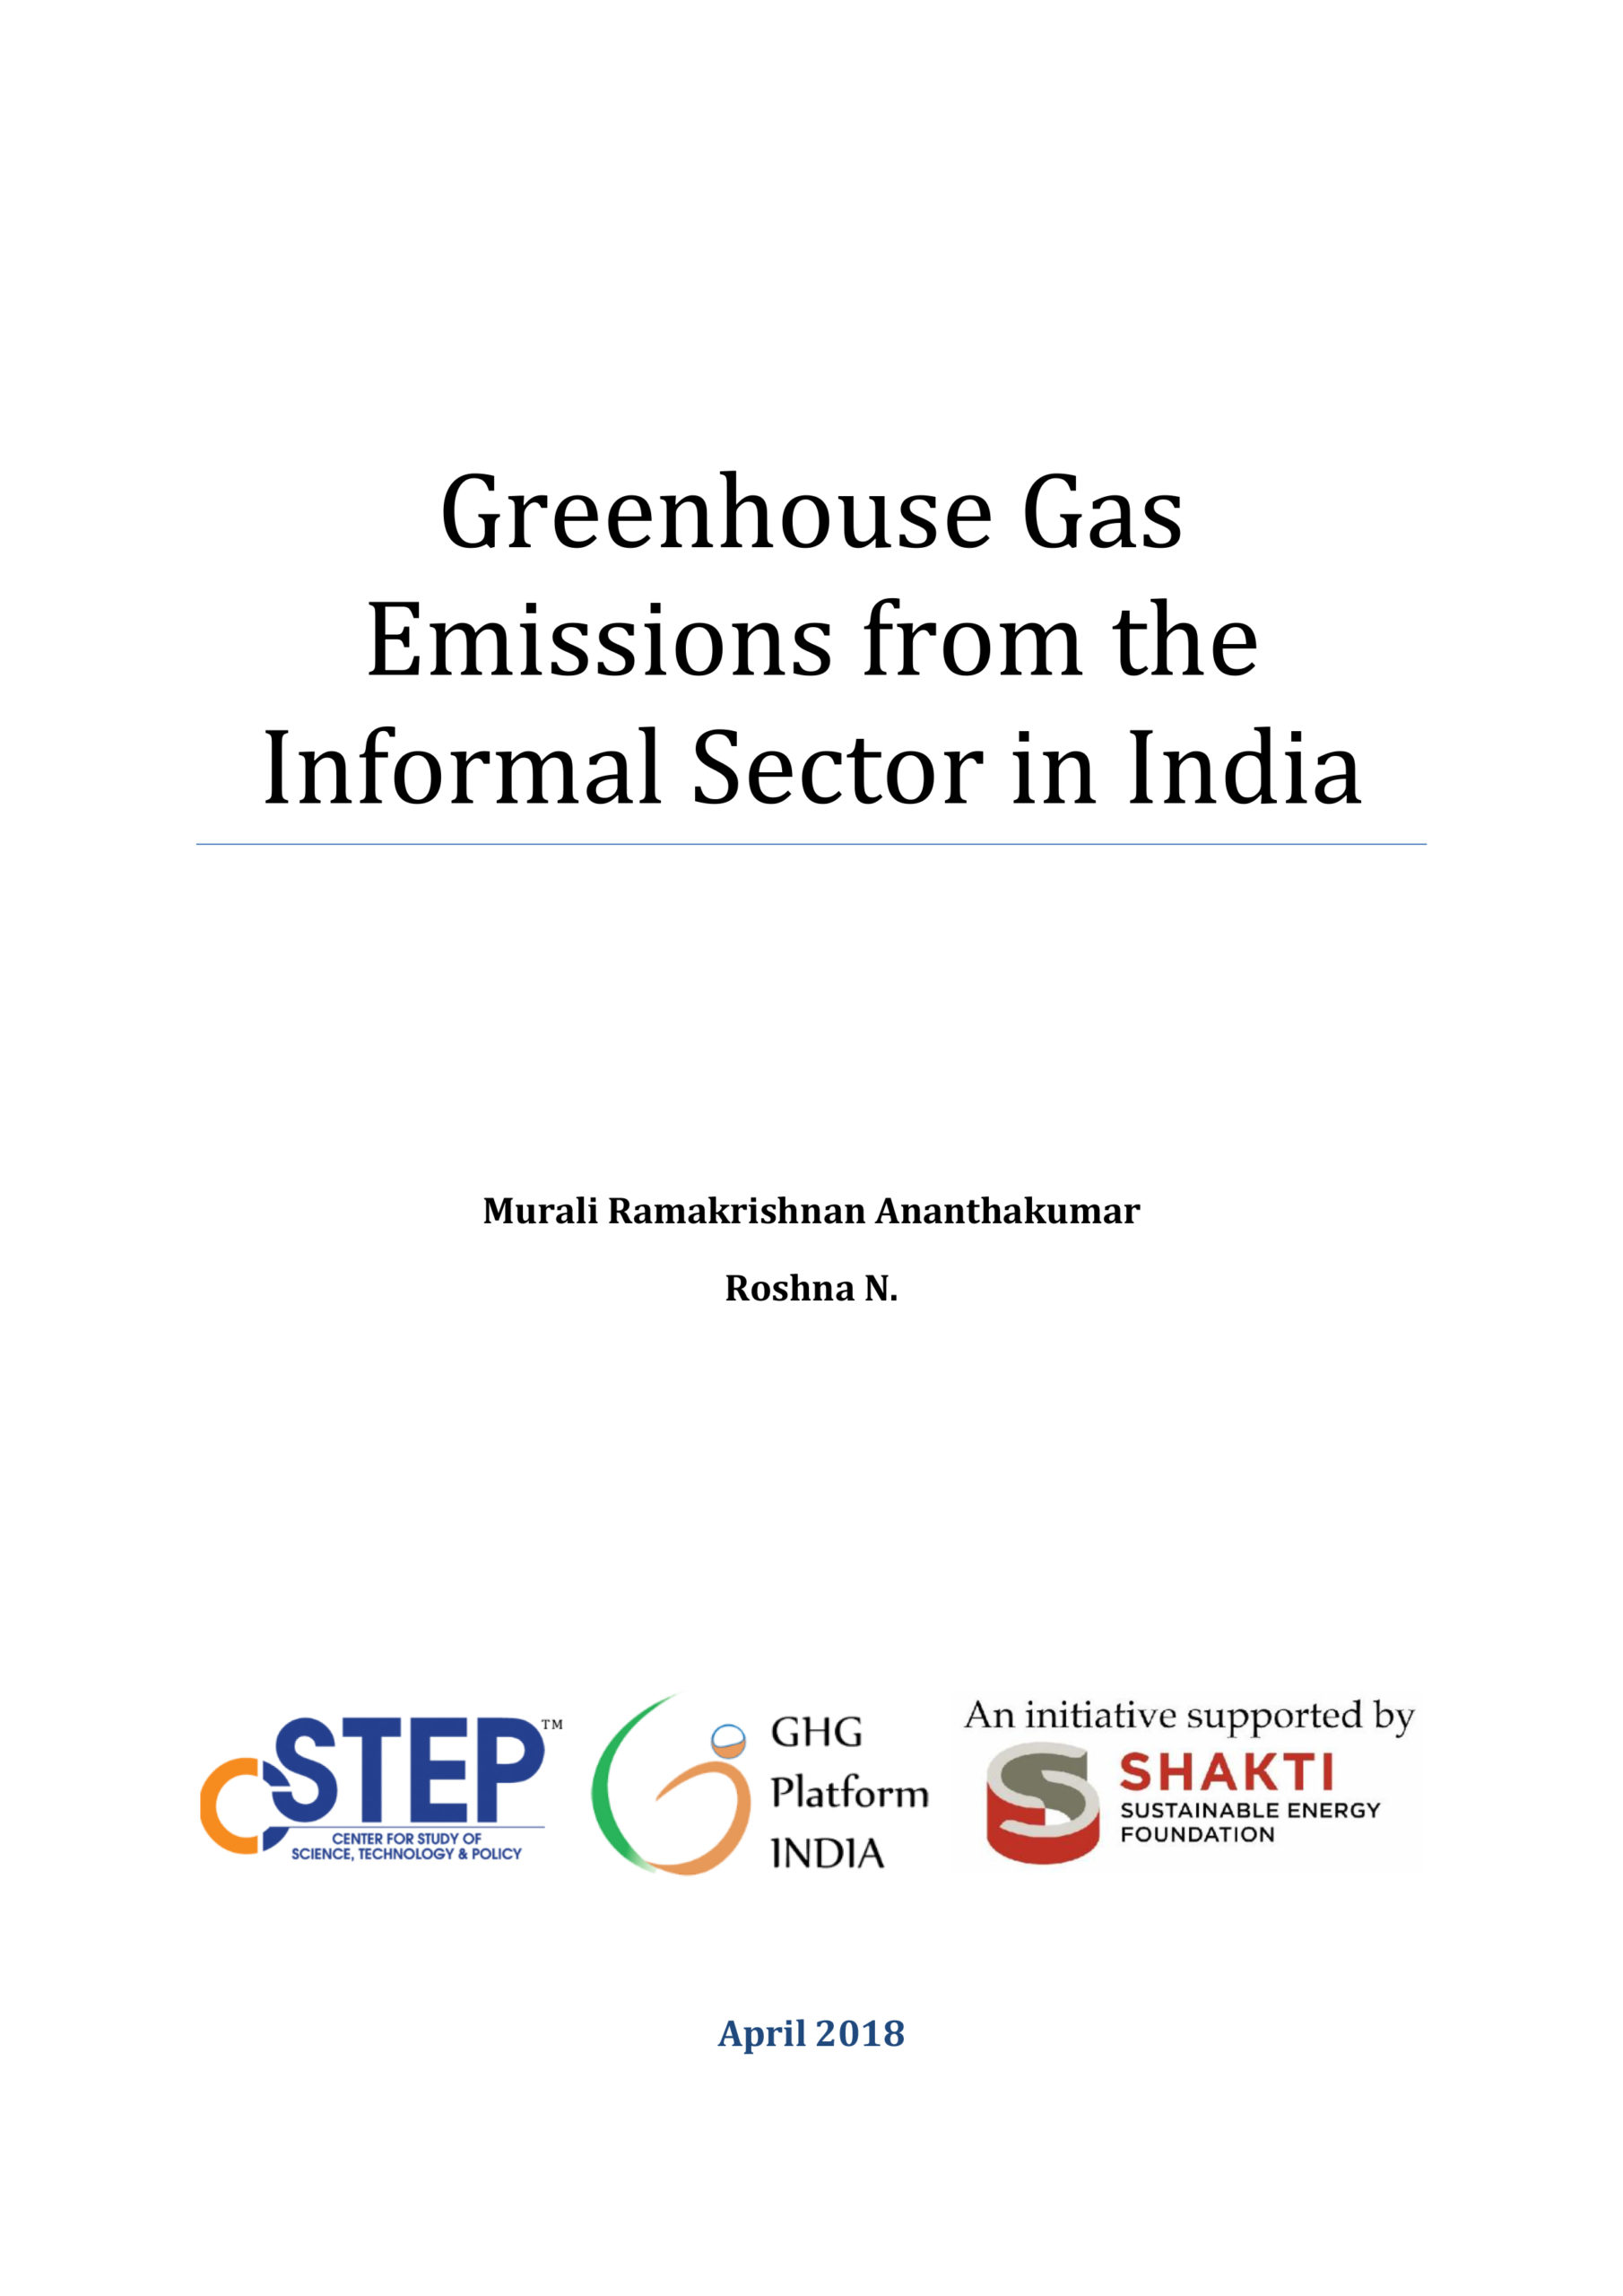 Greenhouse Gas Emissions from the Informal Sector in India